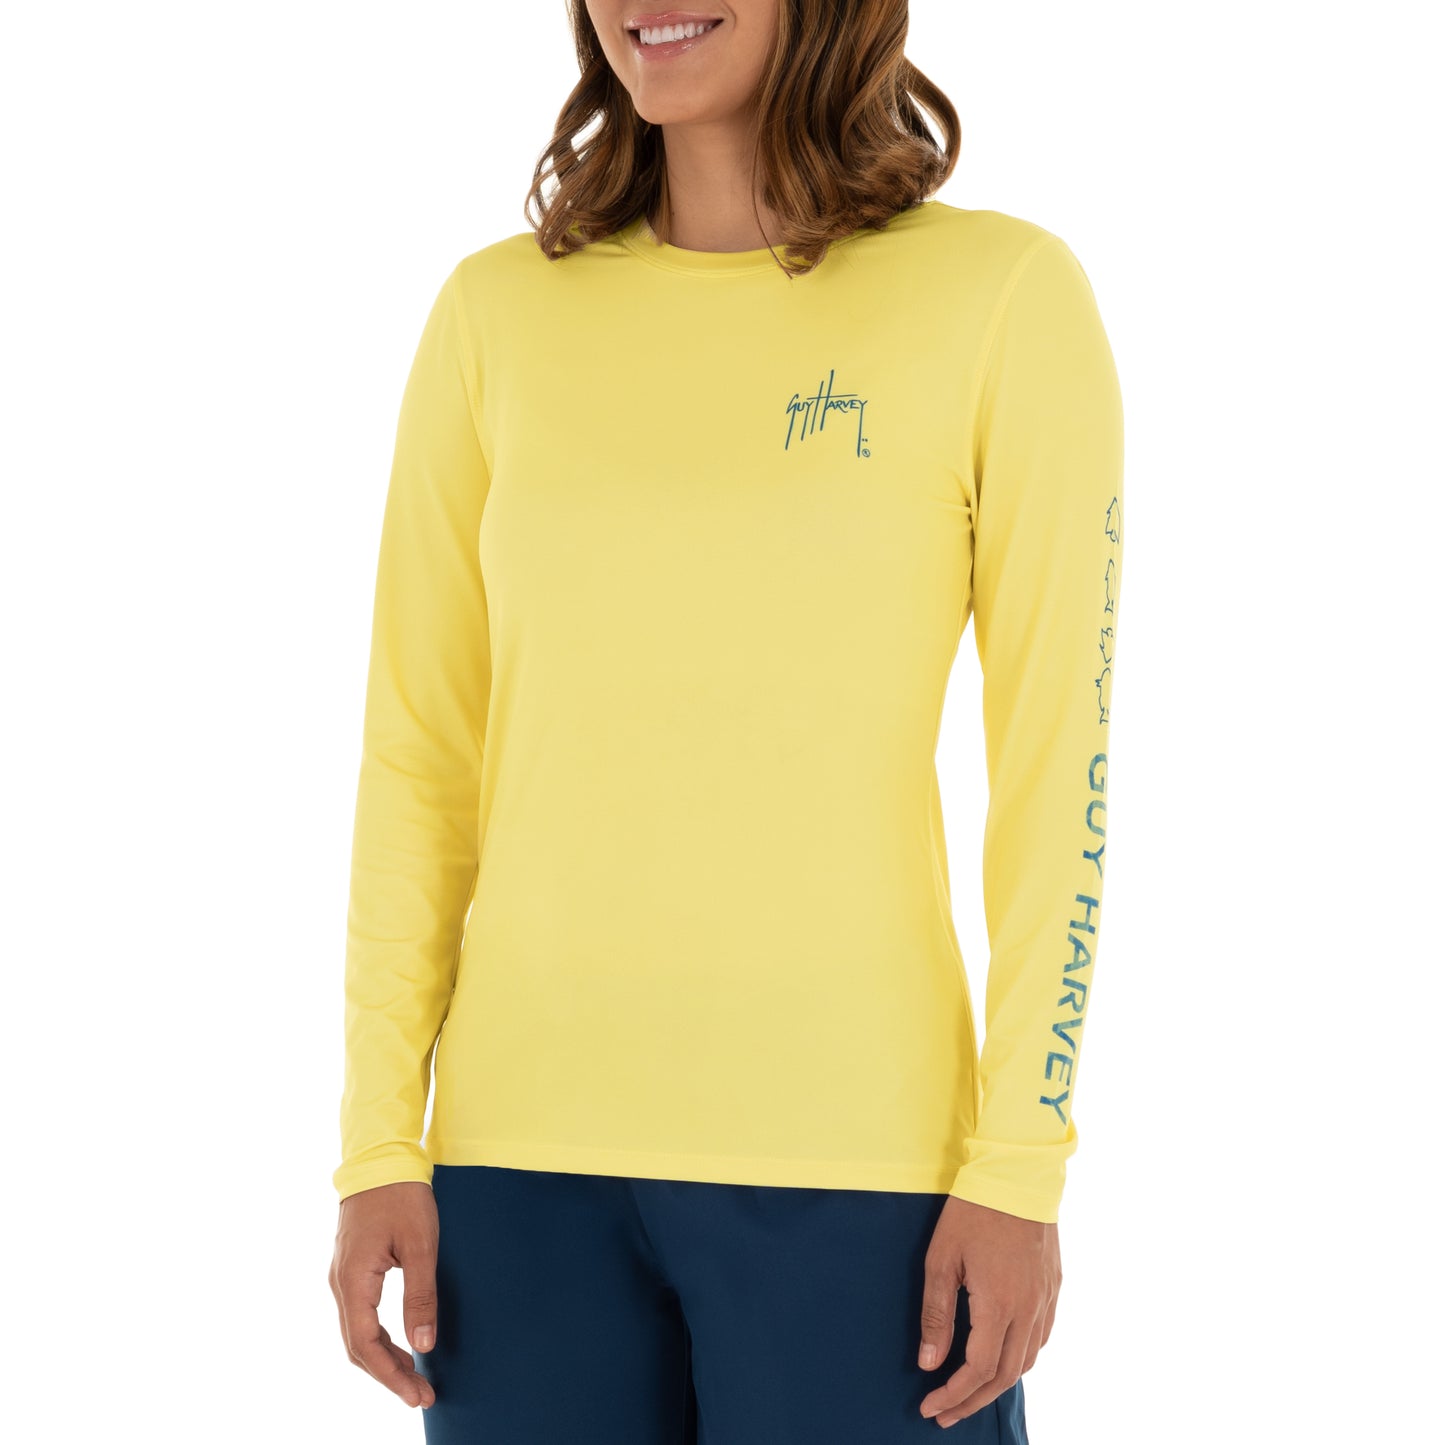 Ladies Core Solid Yellow Sun Protection Top View 1